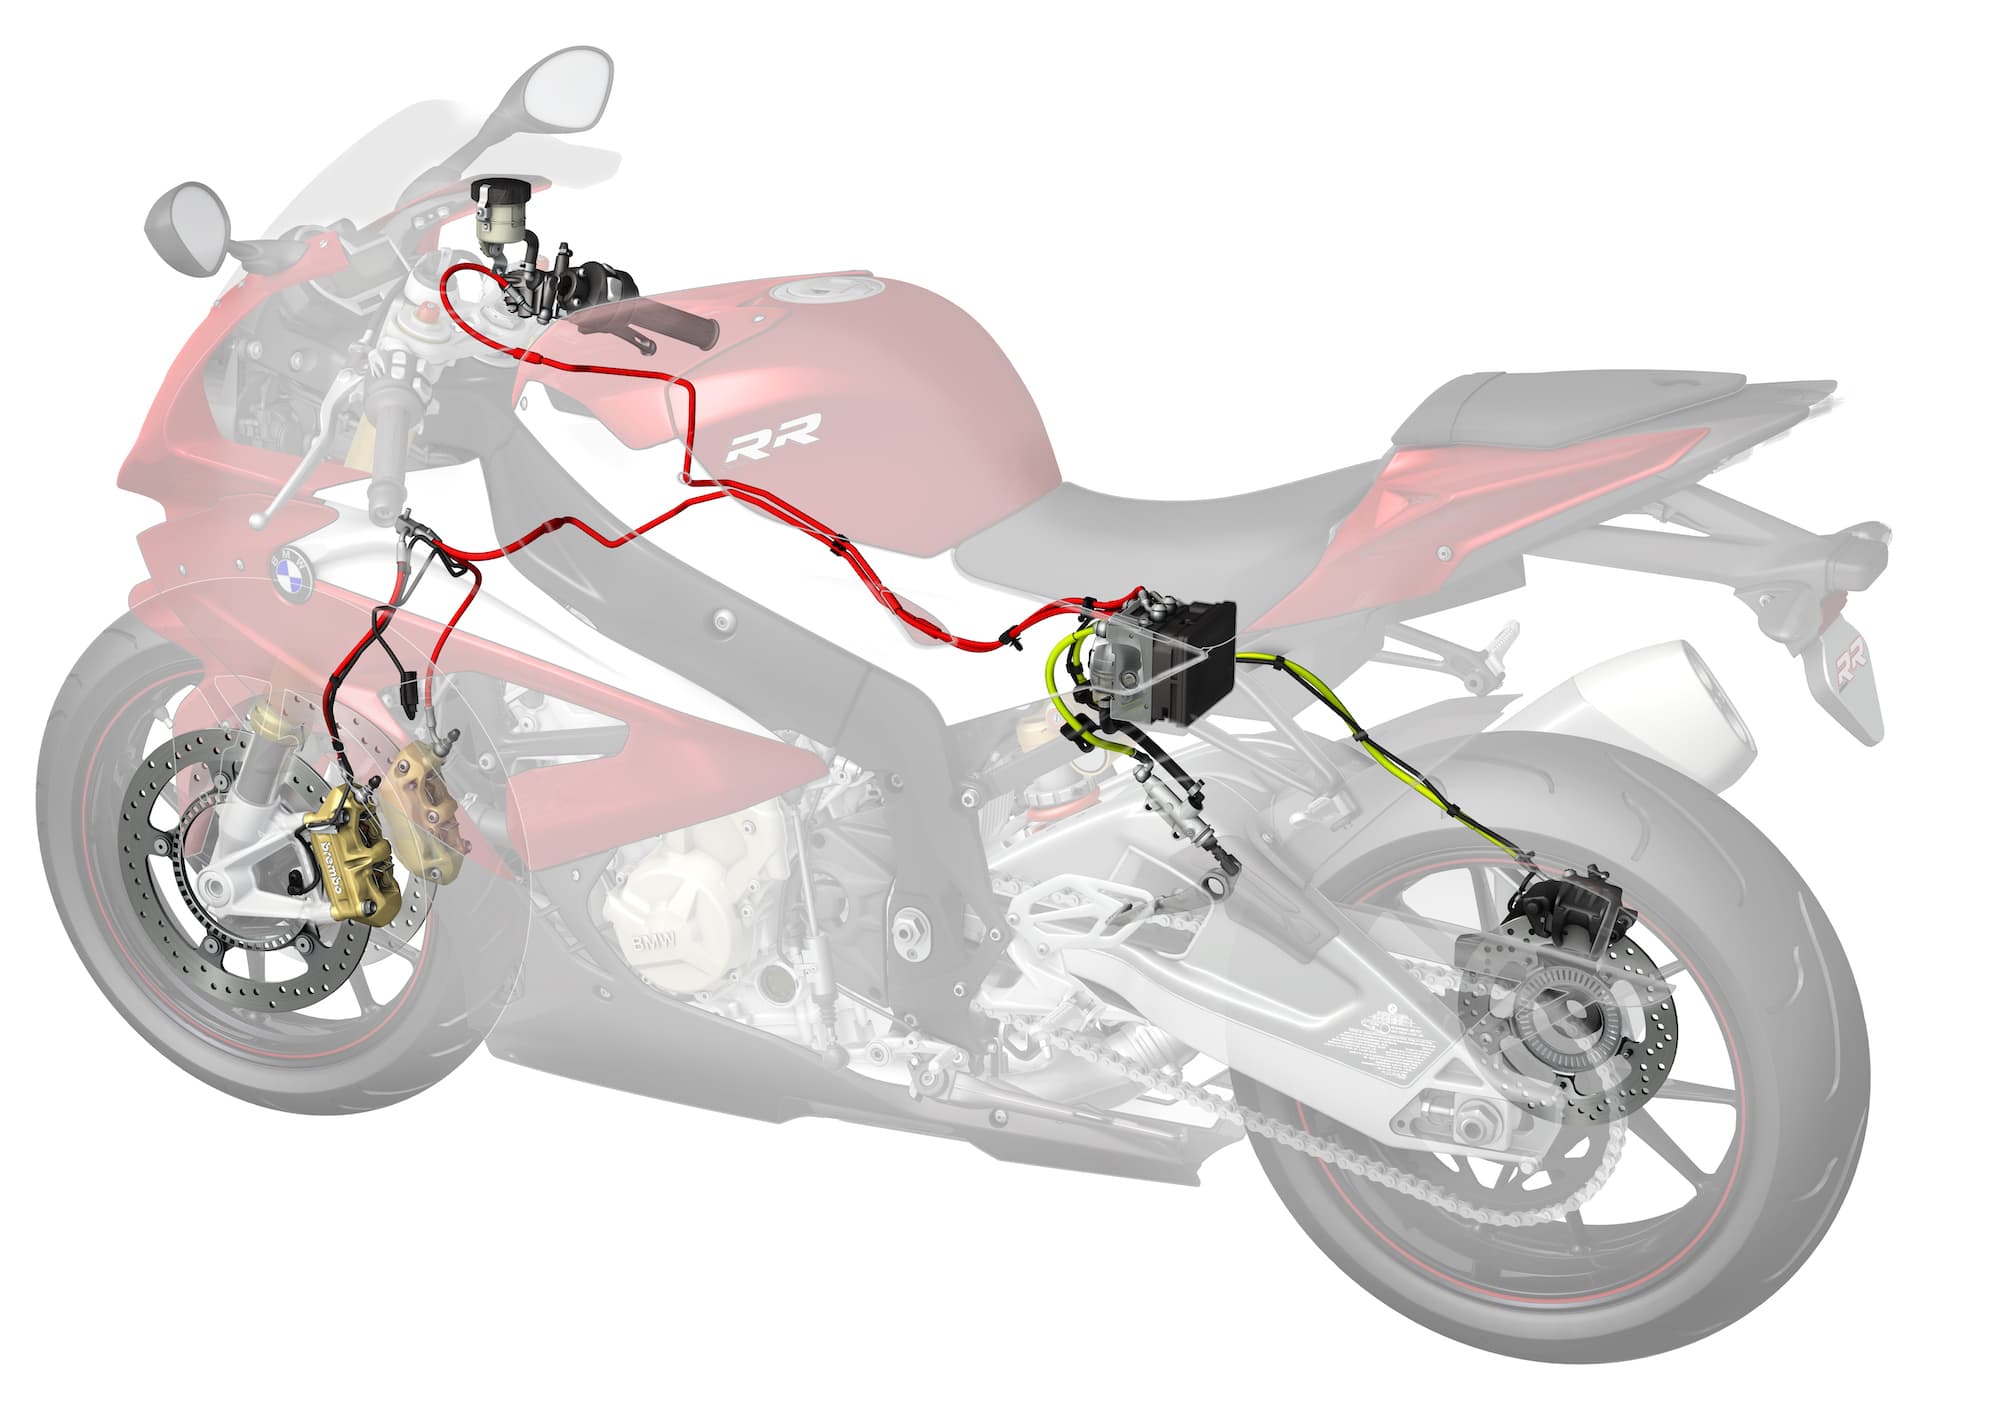 Motorcycle Braking Systems Explained — A Complete FAQ